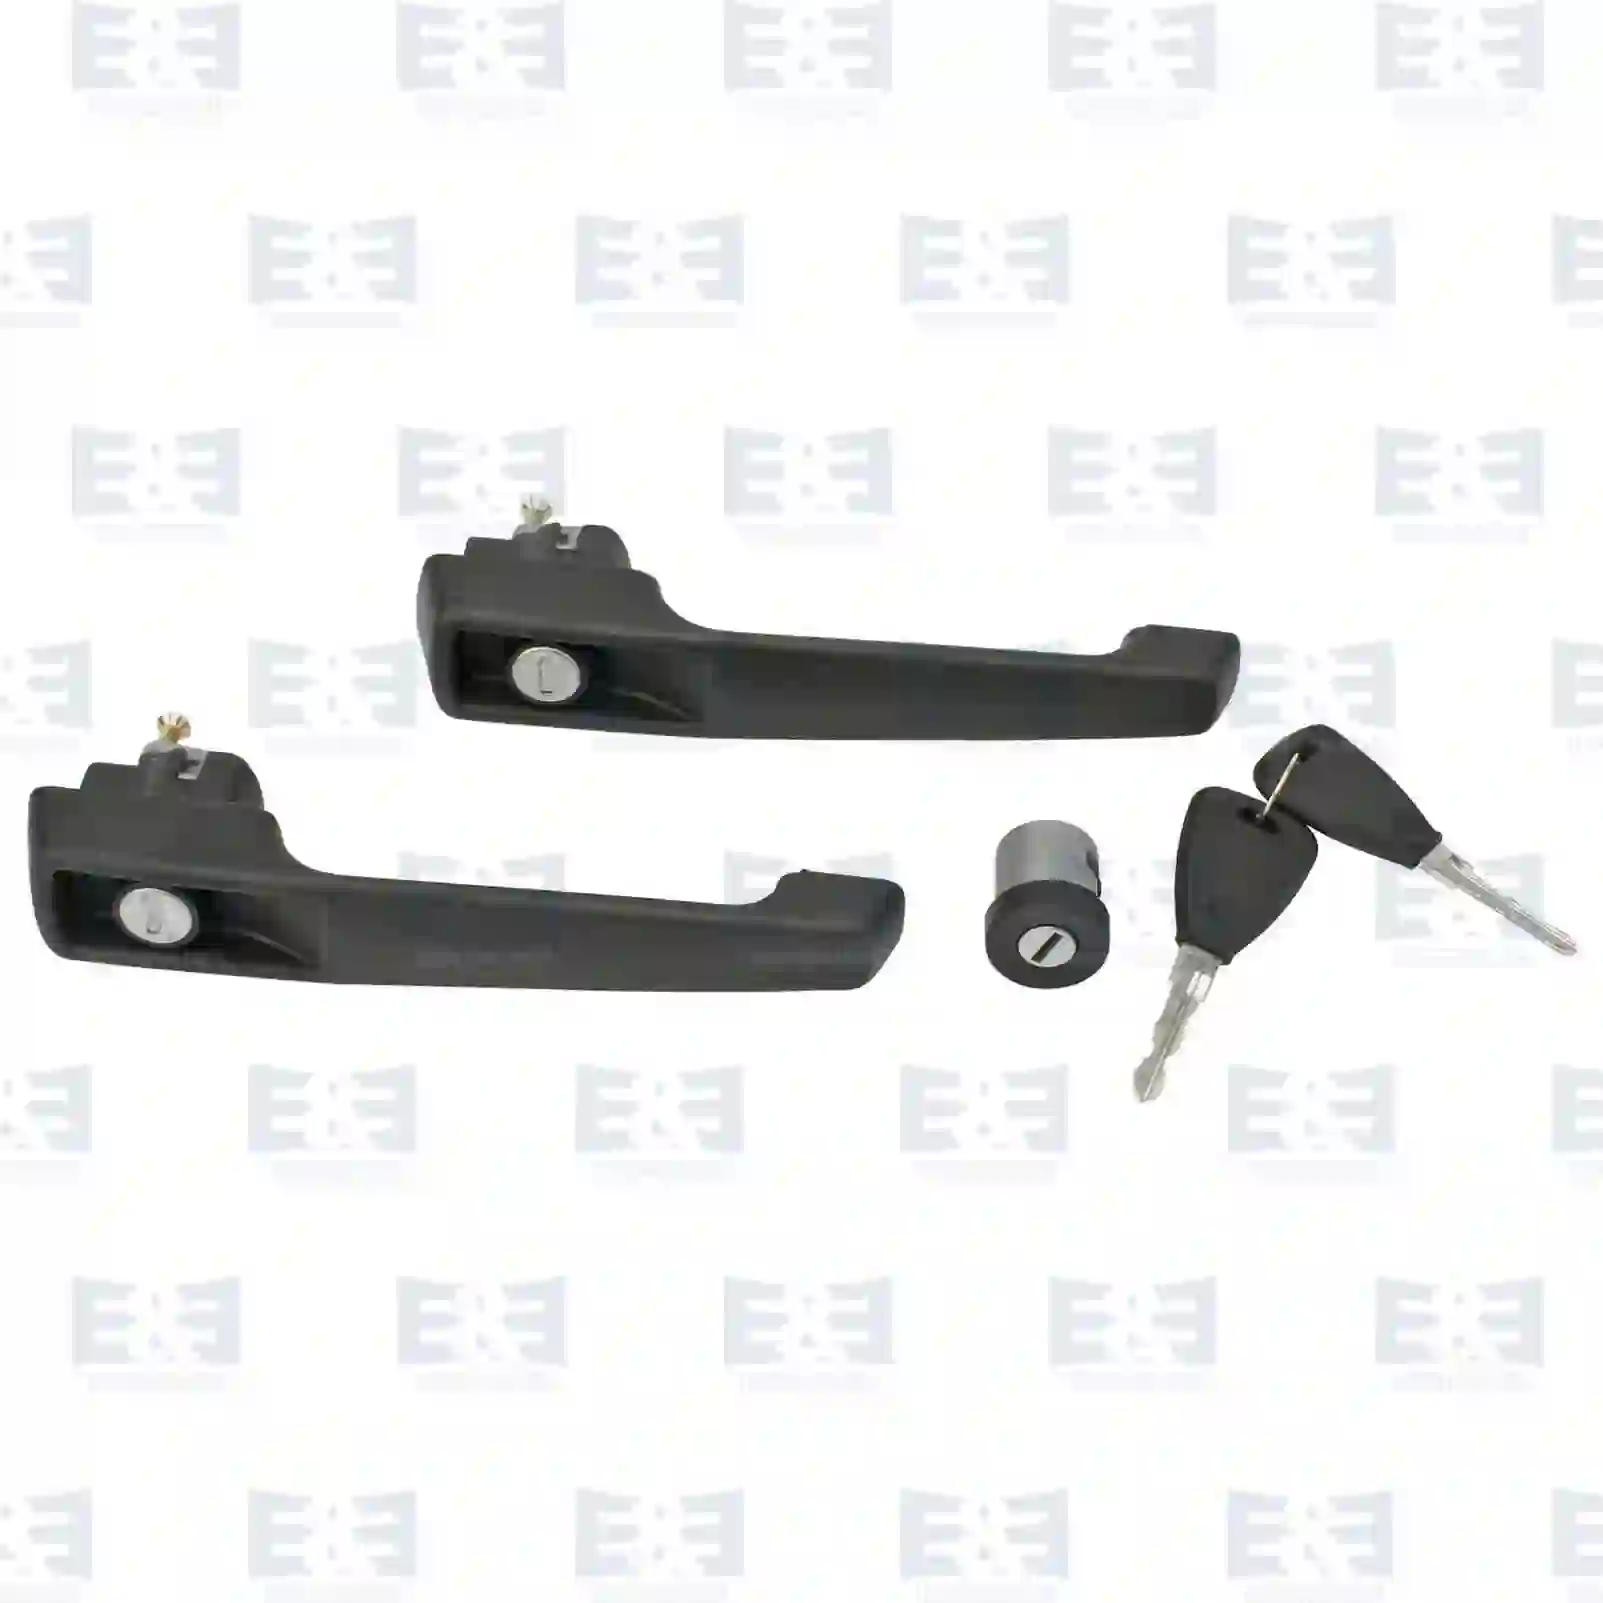 Door handle, complete with lock cylinder, 2E2292654, 3818930603 ||  2E2292654 E&E Truck Spare Parts | Truck Spare Parts, Auotomotive Spare Parts Door handle, complete with lock cylinder, 2E2292654, 3818930603 ||  2E2292654 E&E Truck Spare Parts | Truck Spare Parts, Auotomotive Spare Parts